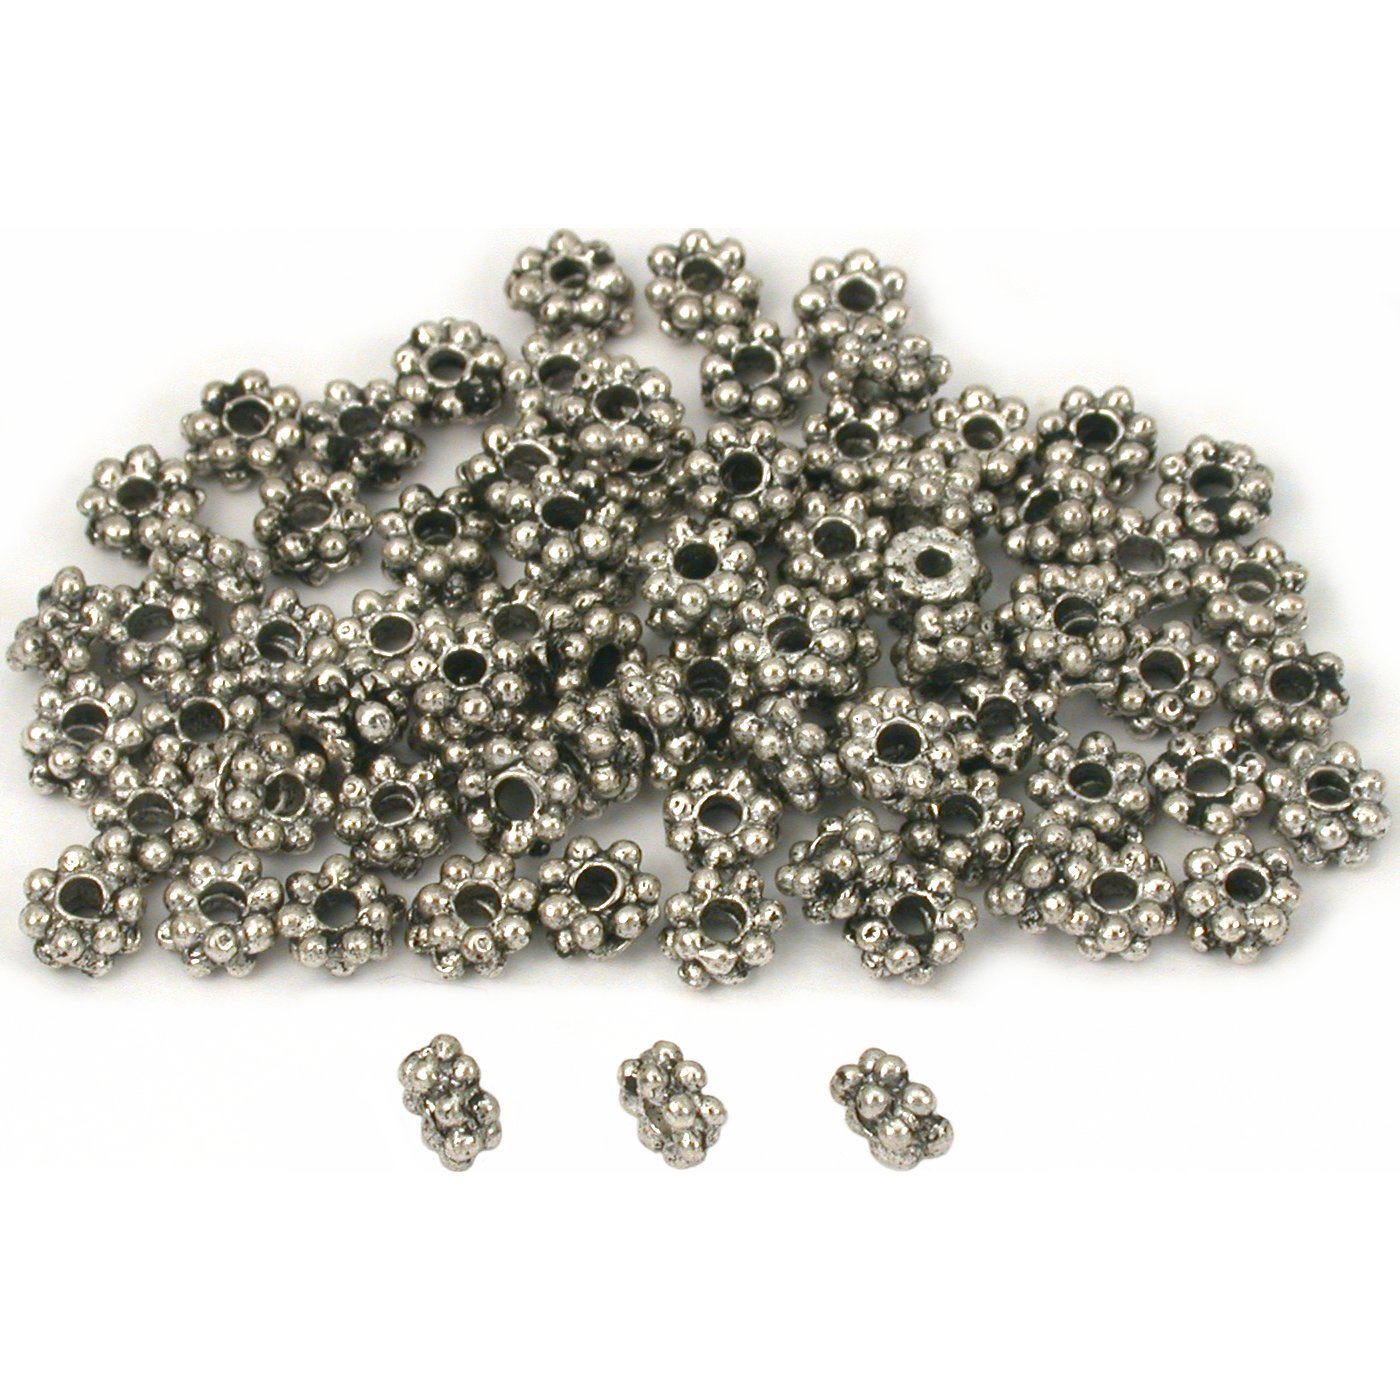 Bali Spacer Daisy Beads Antique Silver Plated 5mm 80Pcs Approx.